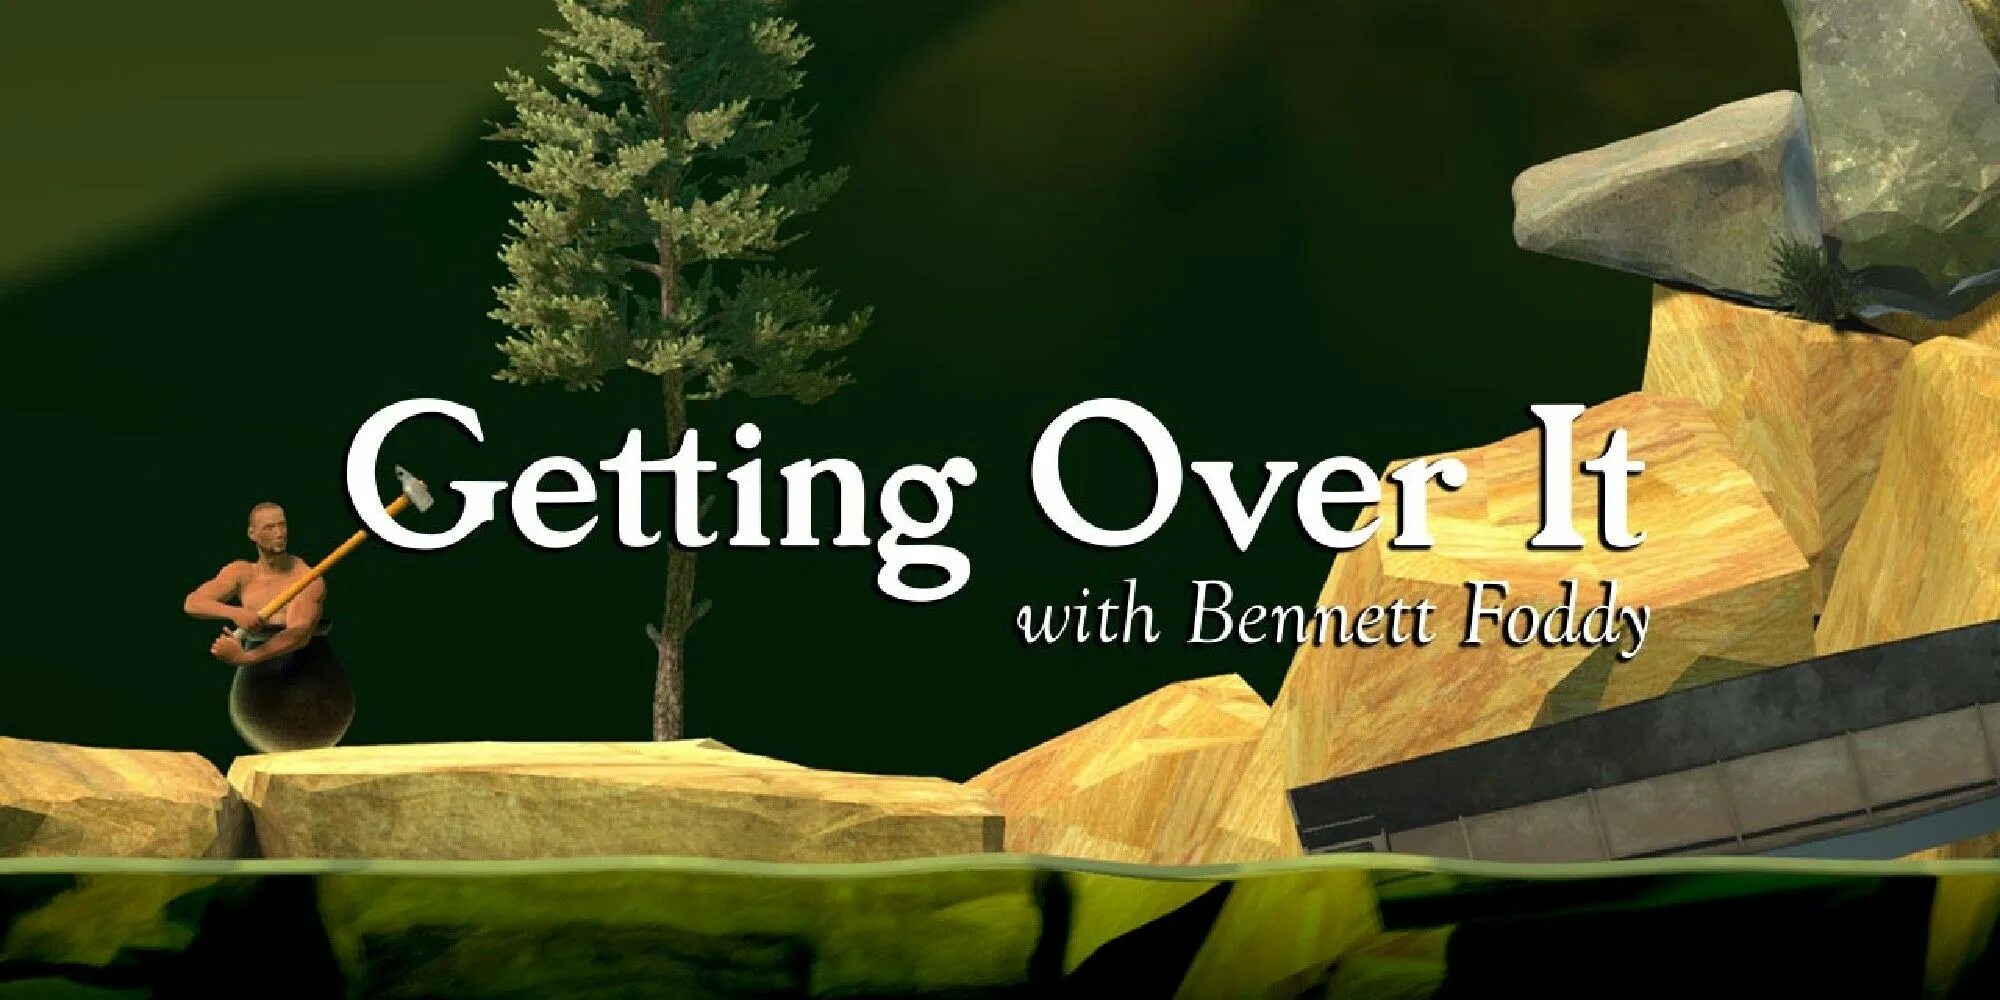 Game get help. Getting over it. Беннетт ФОДДИ. Getting over it with Bennett Foddy стрим. Get over it игра.